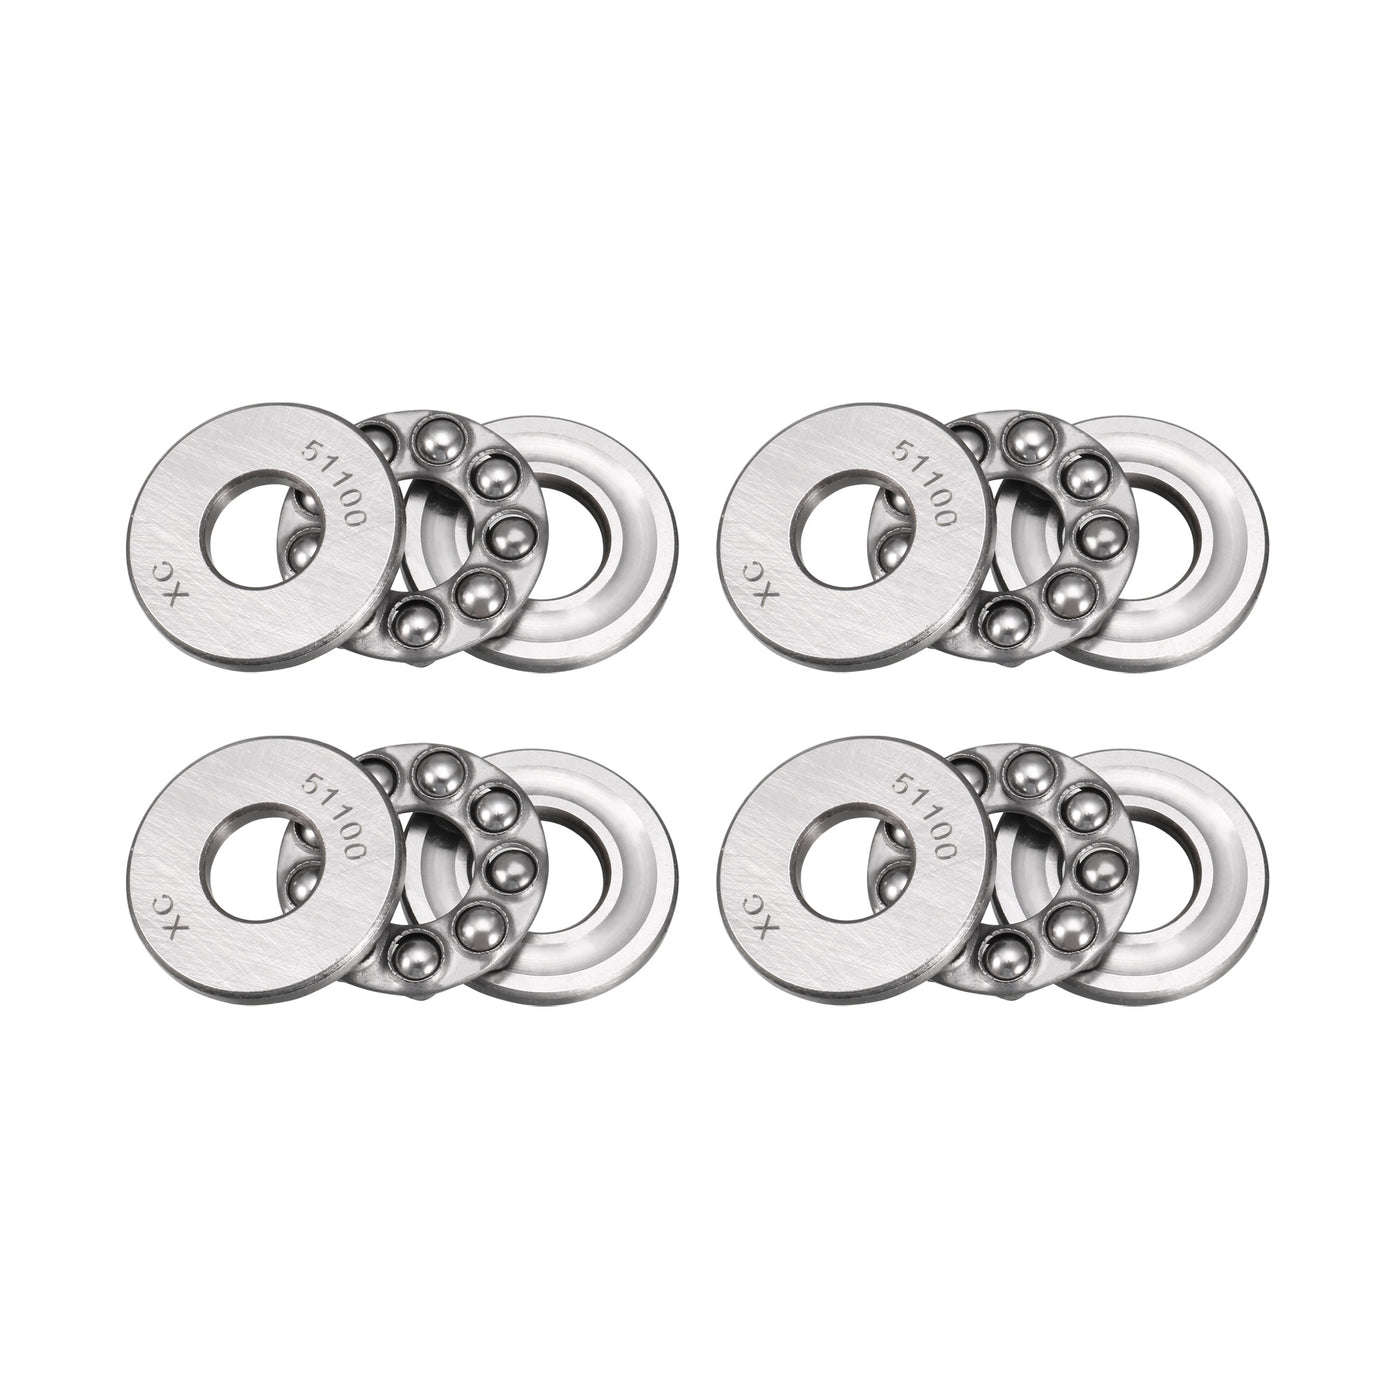 uxcell Uxcell 51100 Miniature Thrust Ball Bearing 10x24x9mm Chrome Steel with Washer 4pcs